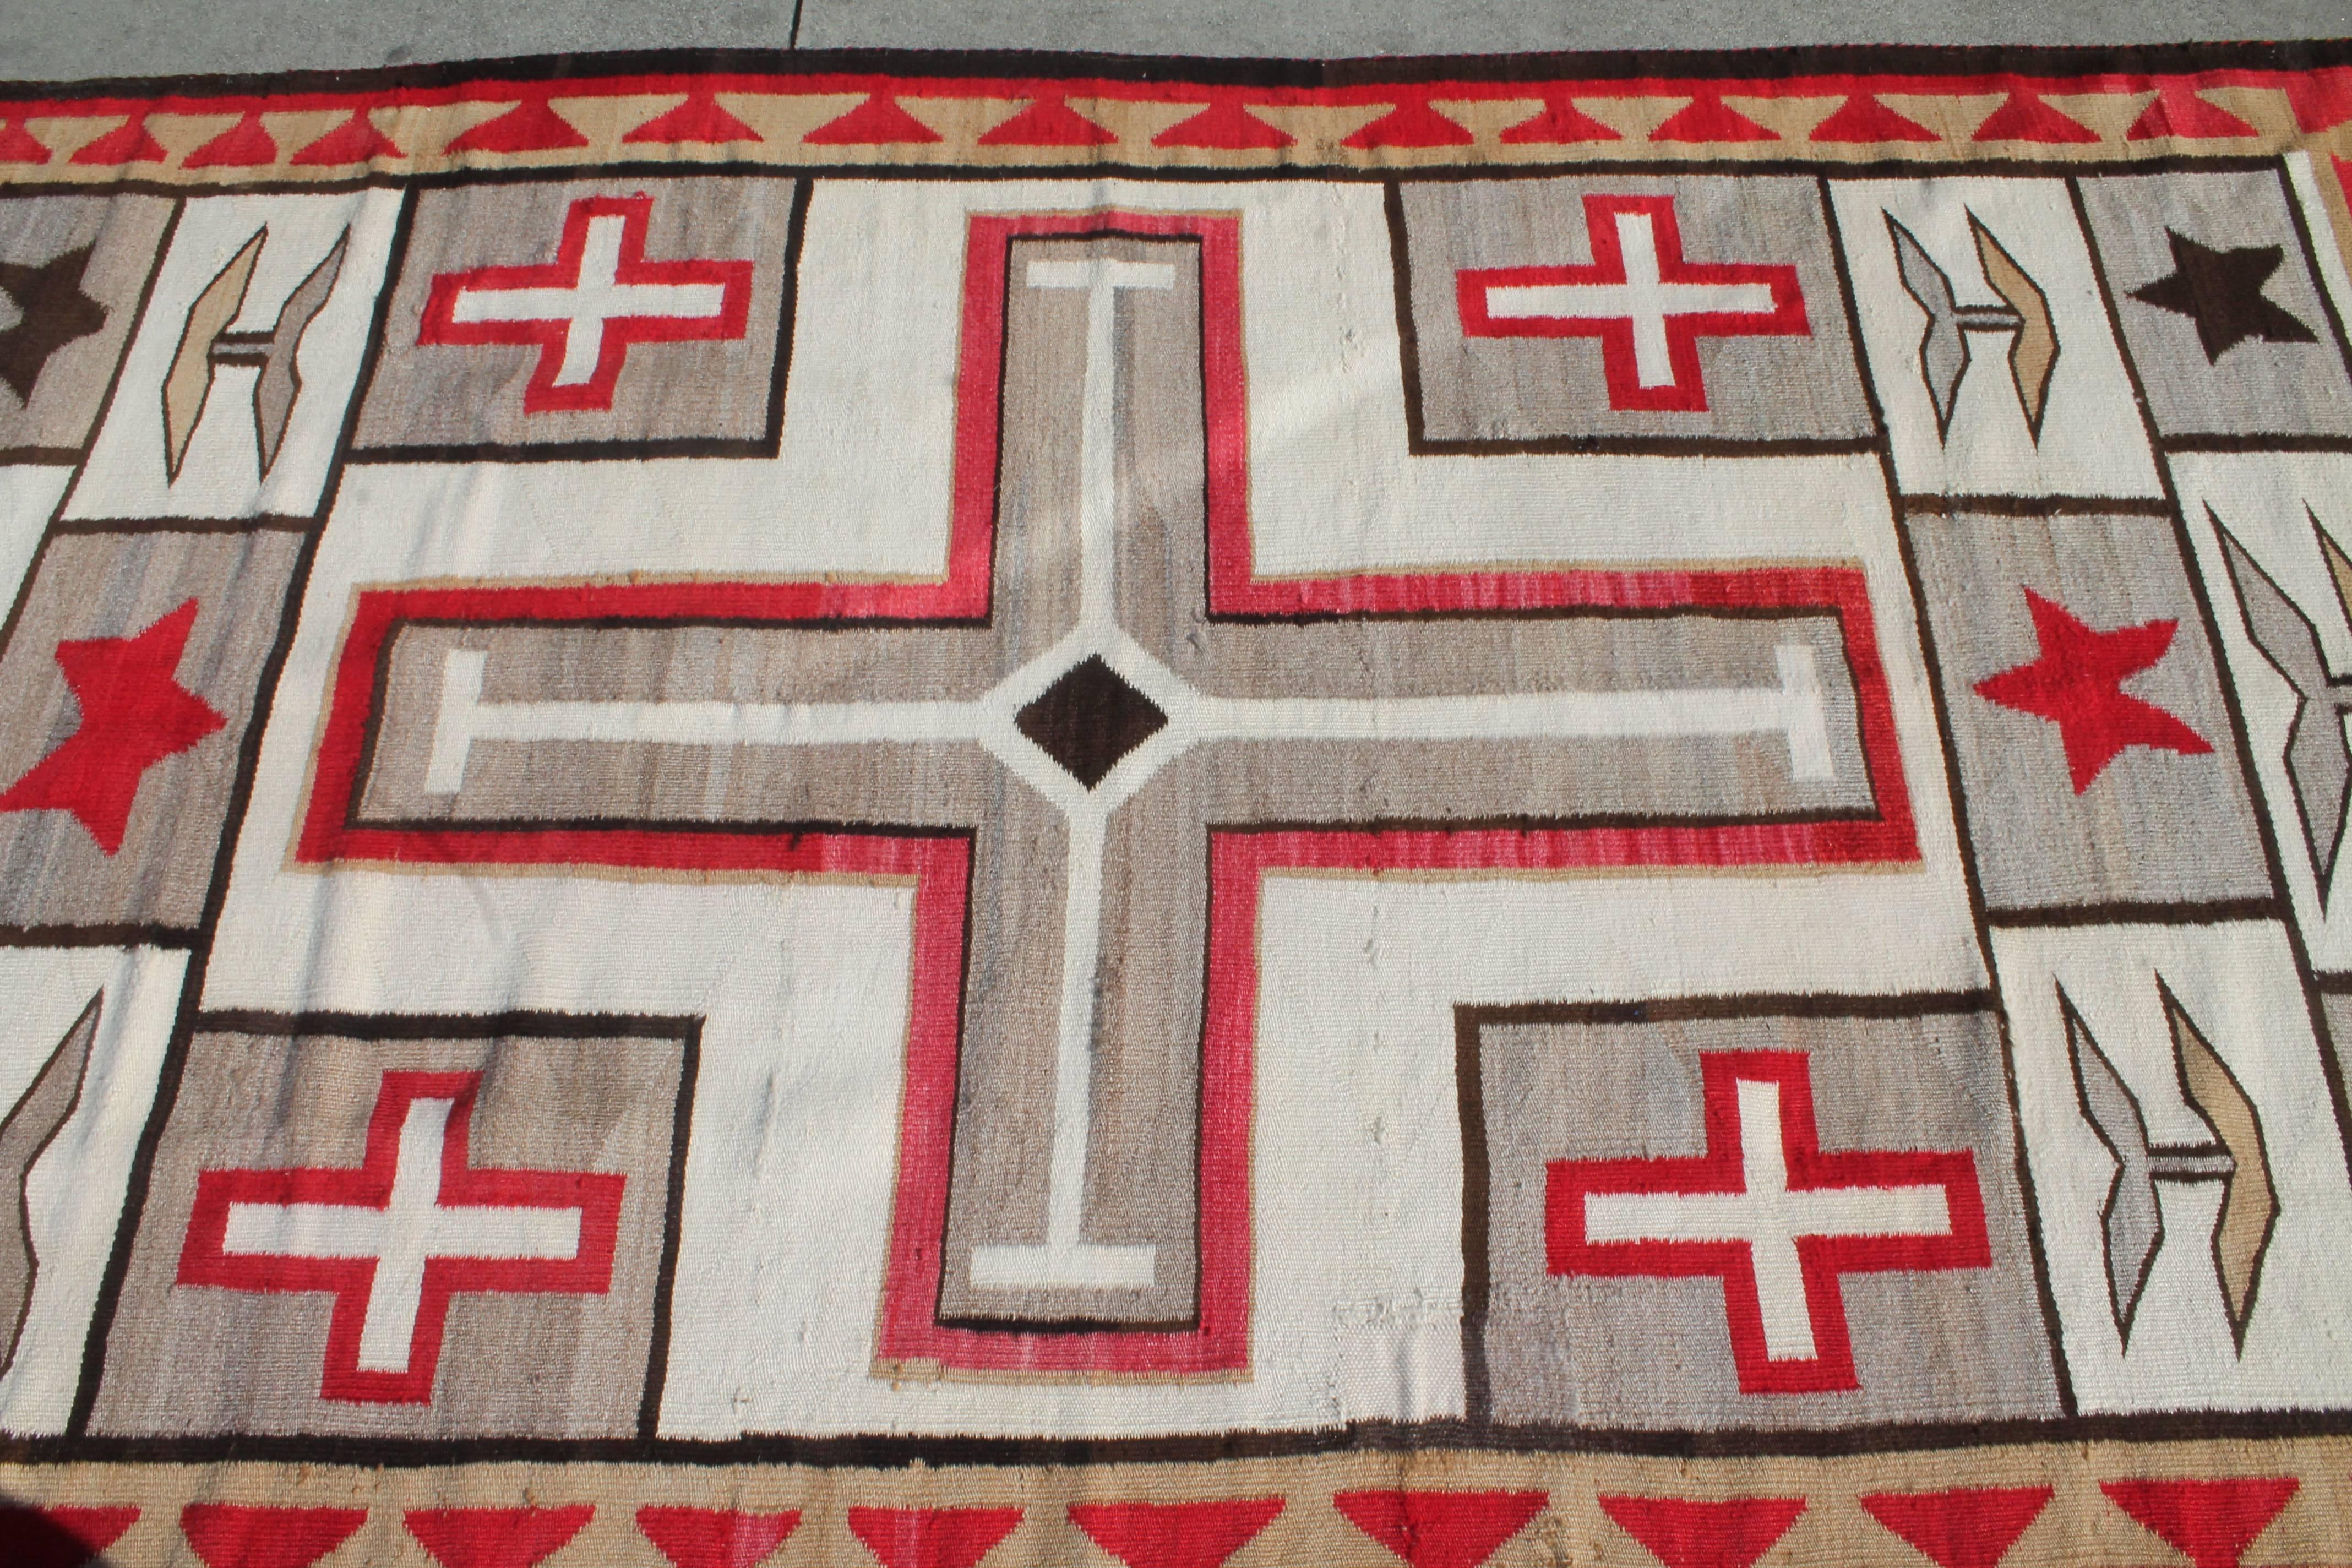 1920s crystal Navajo weaving, circa 1920s. This weaving has minor wear consistent with age and use. This is a room size rug in great condition.